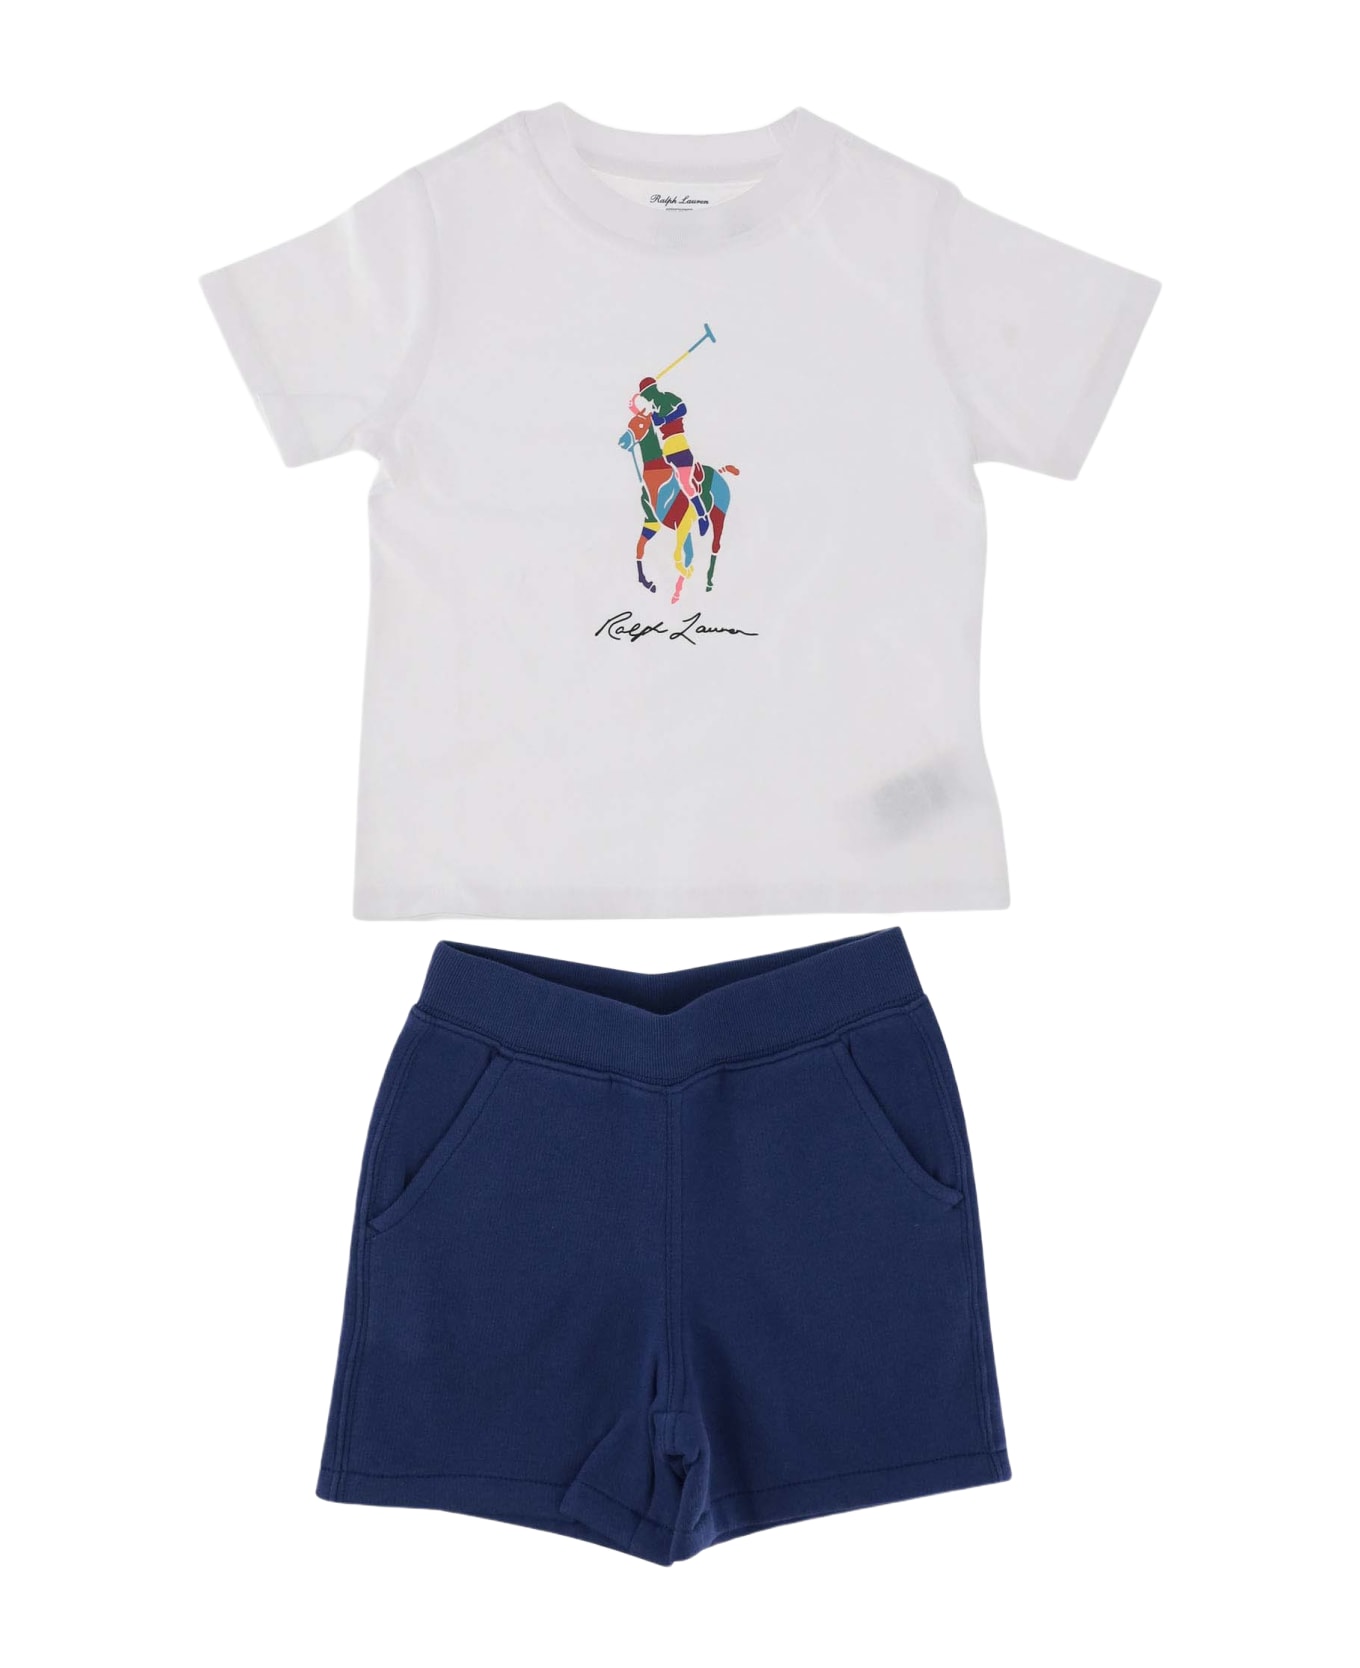 Ralph Lauren Two-piece Cotton Outfit Set - White ボトムス